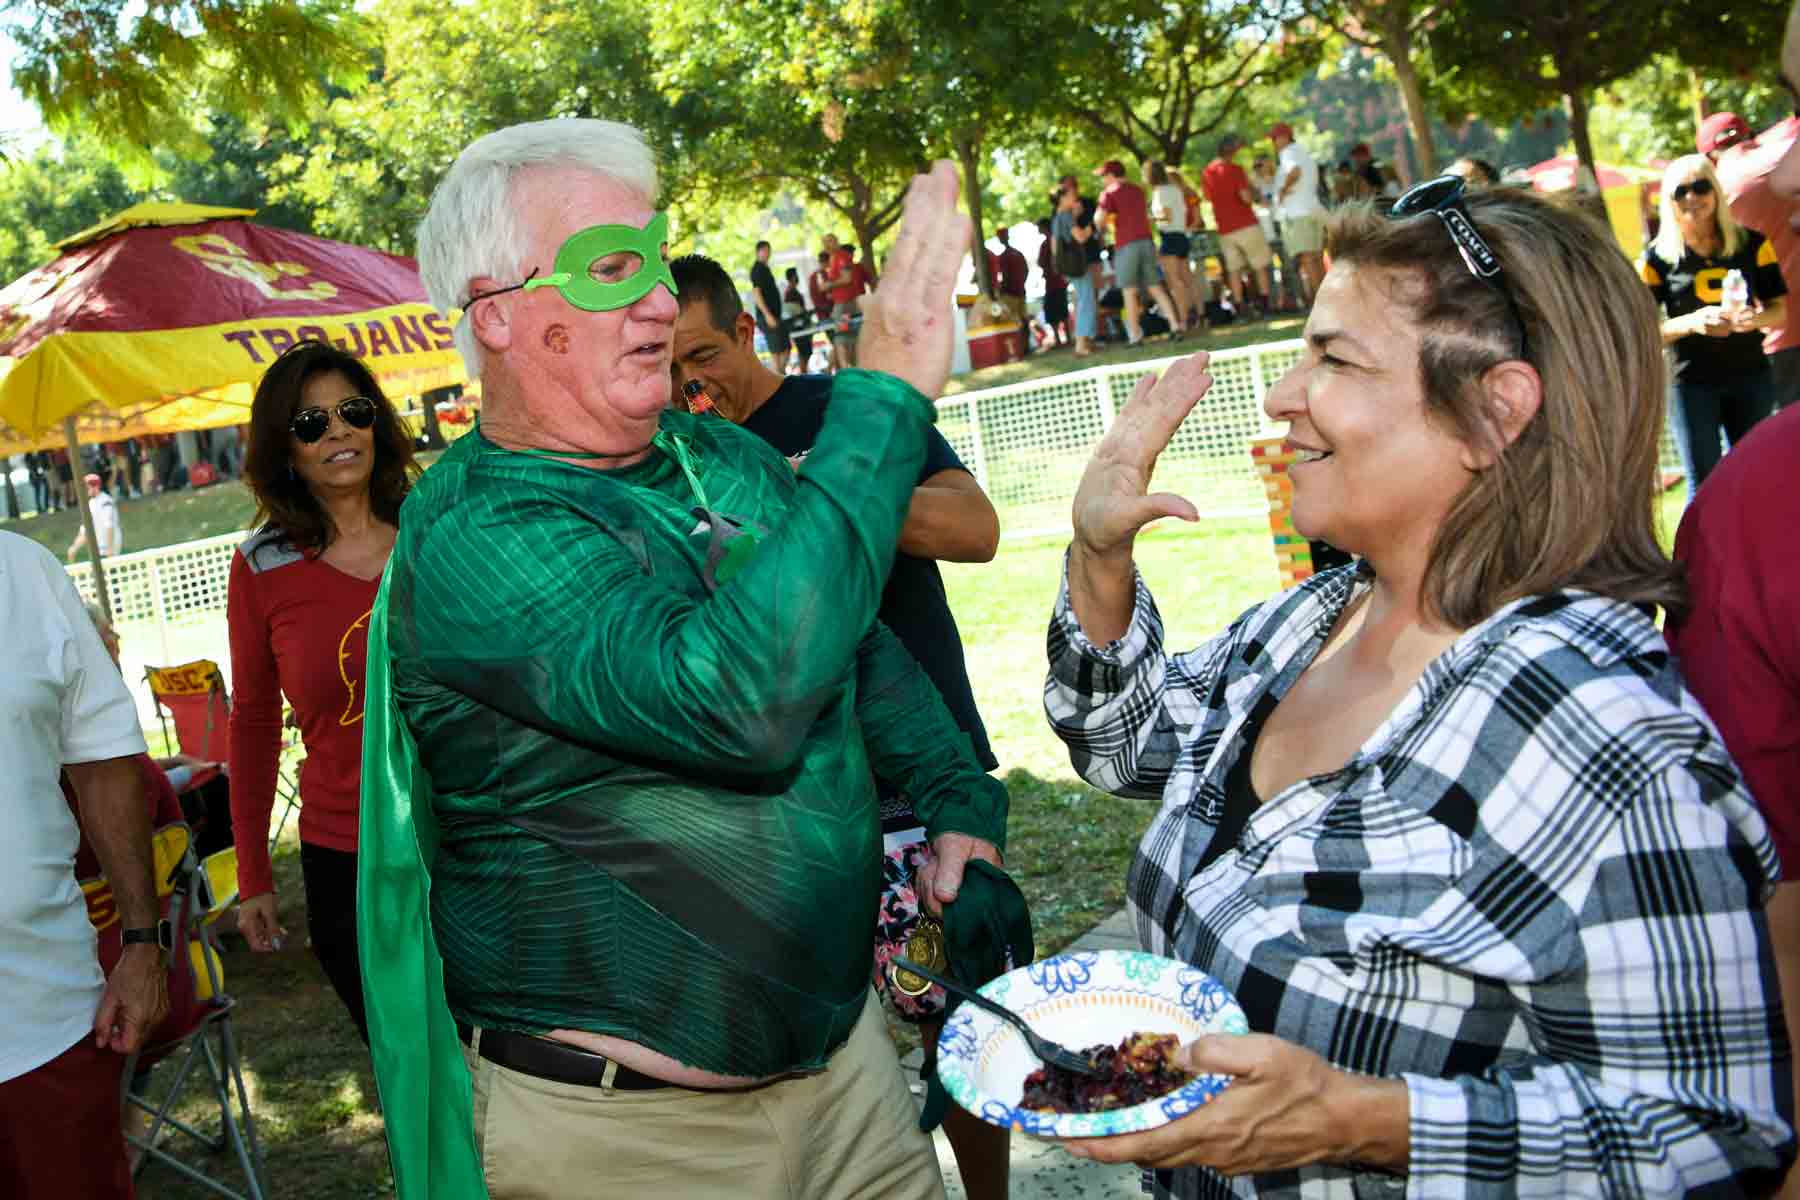 Recycle Man high-fiving a USC tailgater